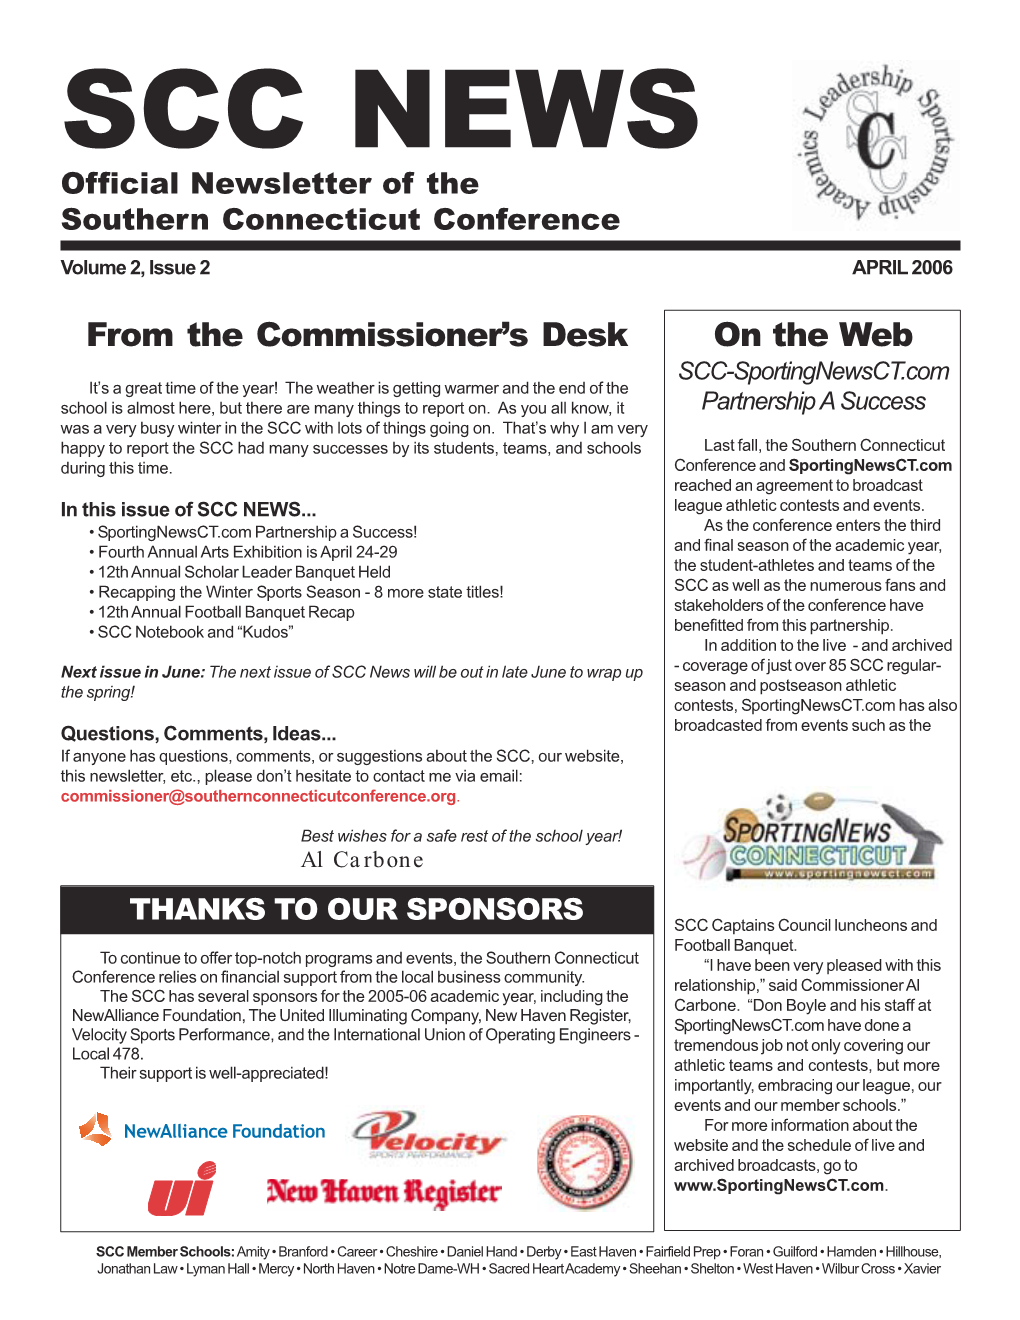 SCC NEWS Official Newsletter of the Southern Connecticut Conference Volume 2, Issue 2 APRIL 2006